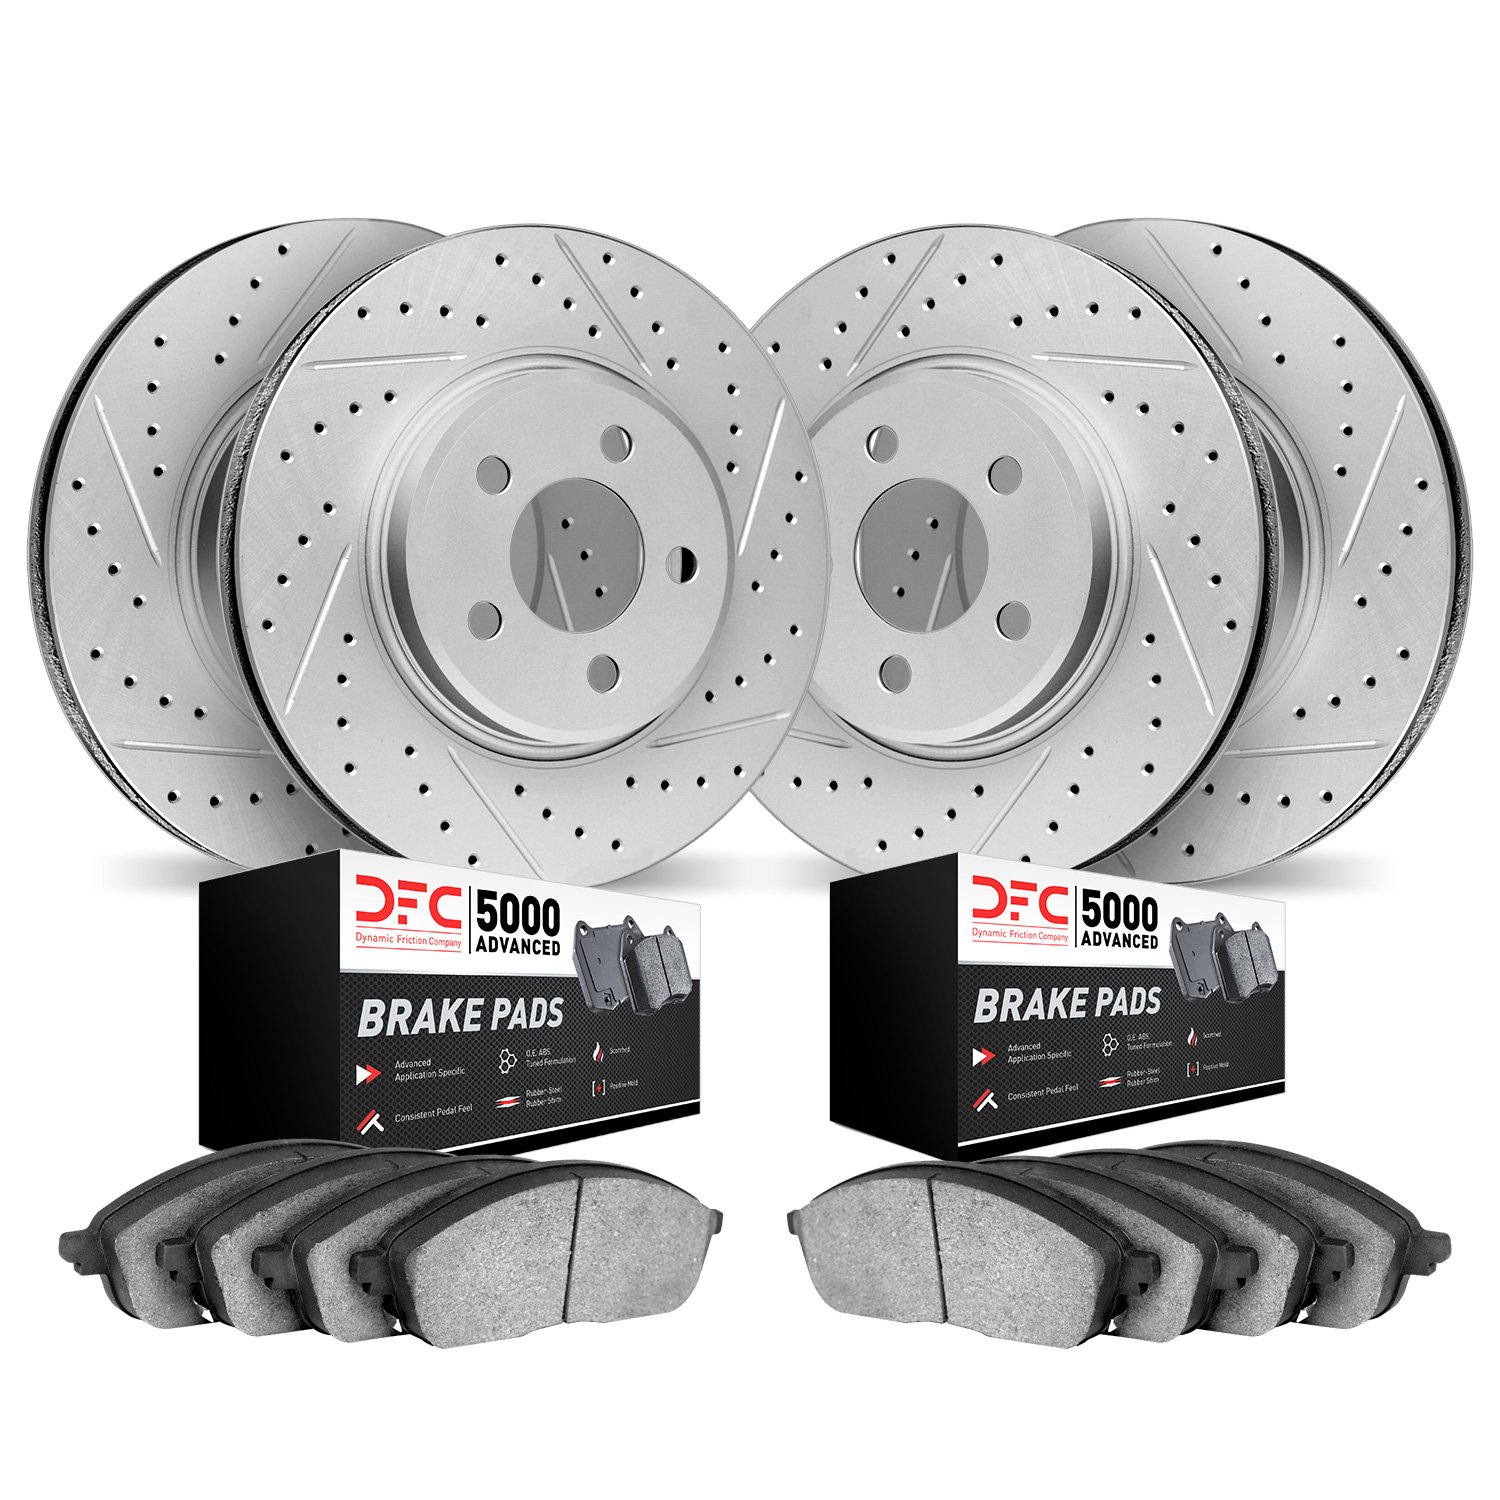 2504-31027 Geoperformance Drilled/Slotted Rotors w/5000 Advanced Brake Pads Kit, 2013-2020 BMW, Position: Front and Rear